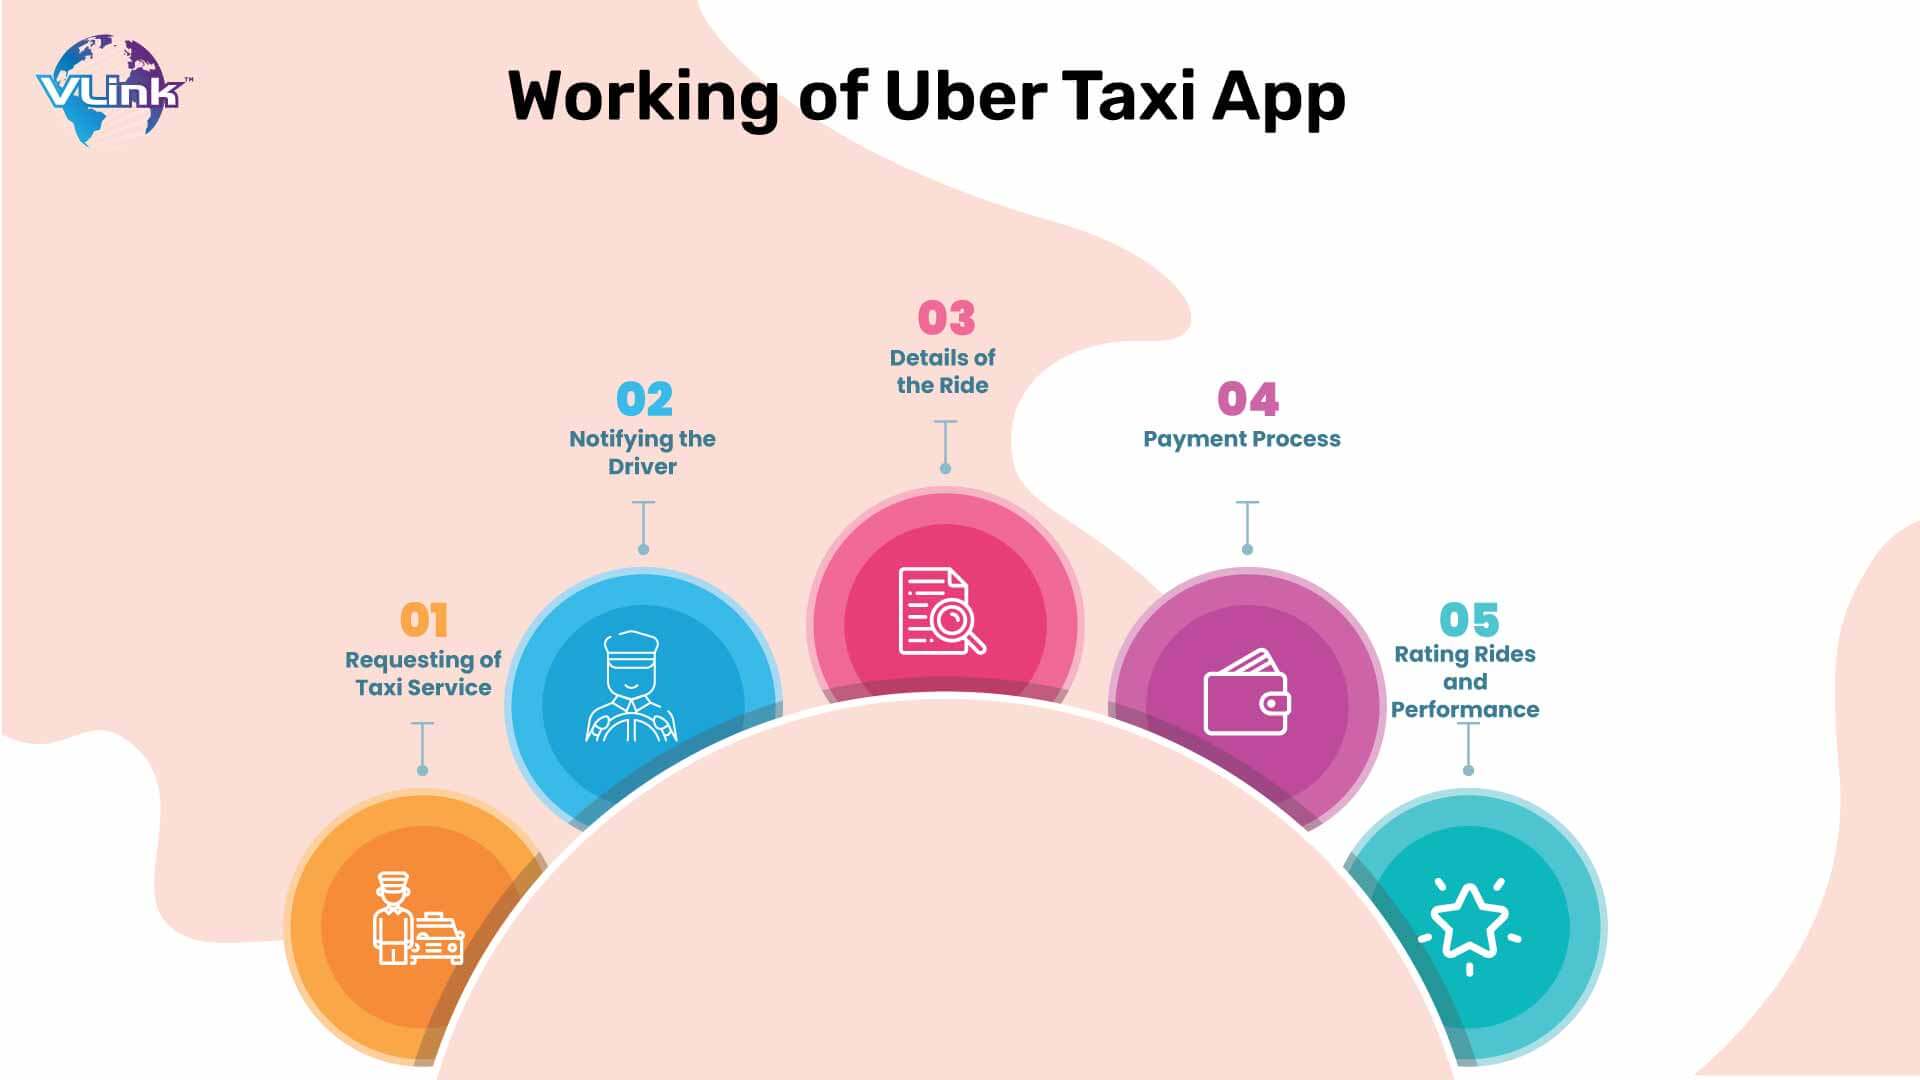 Working of Uber Taxi App